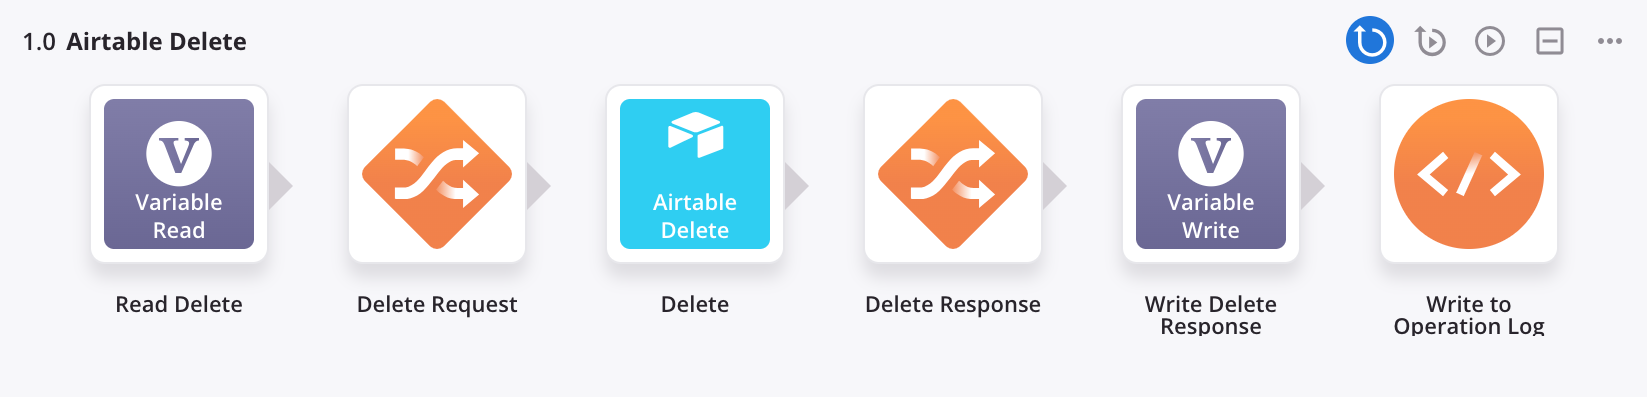 Airtable Delete operation